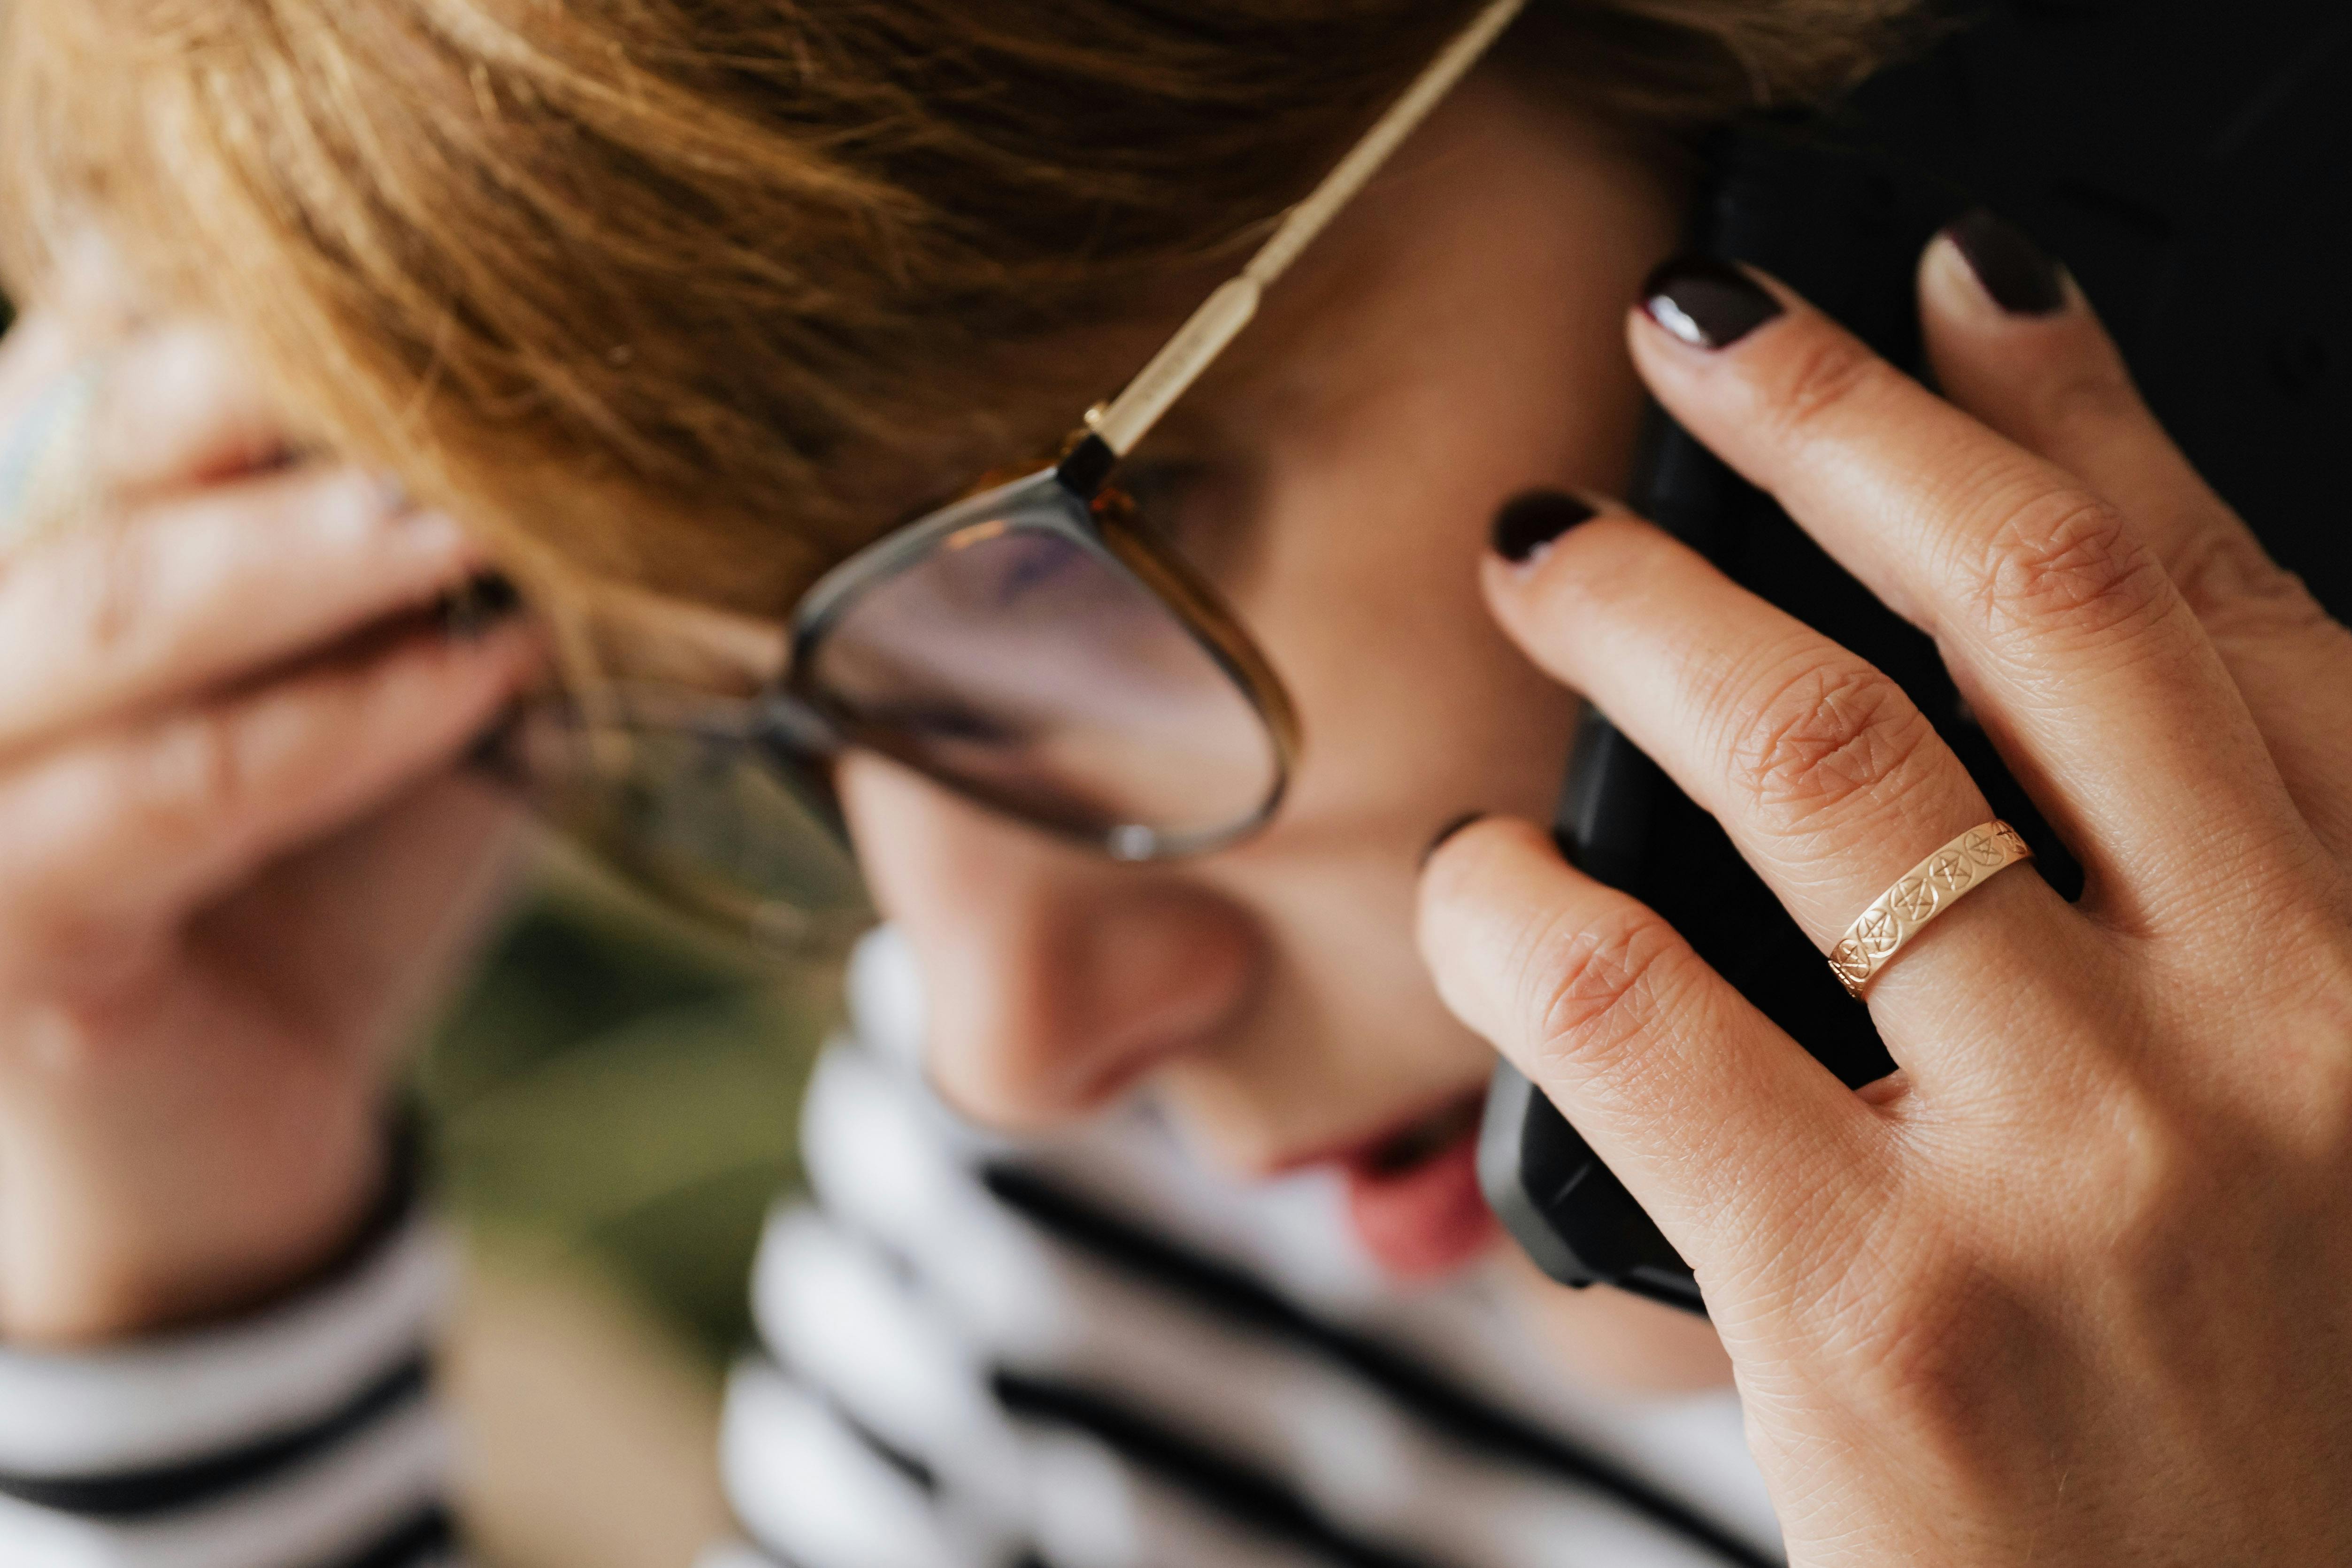 A distressed woman talking on the phone | Source: Pexels